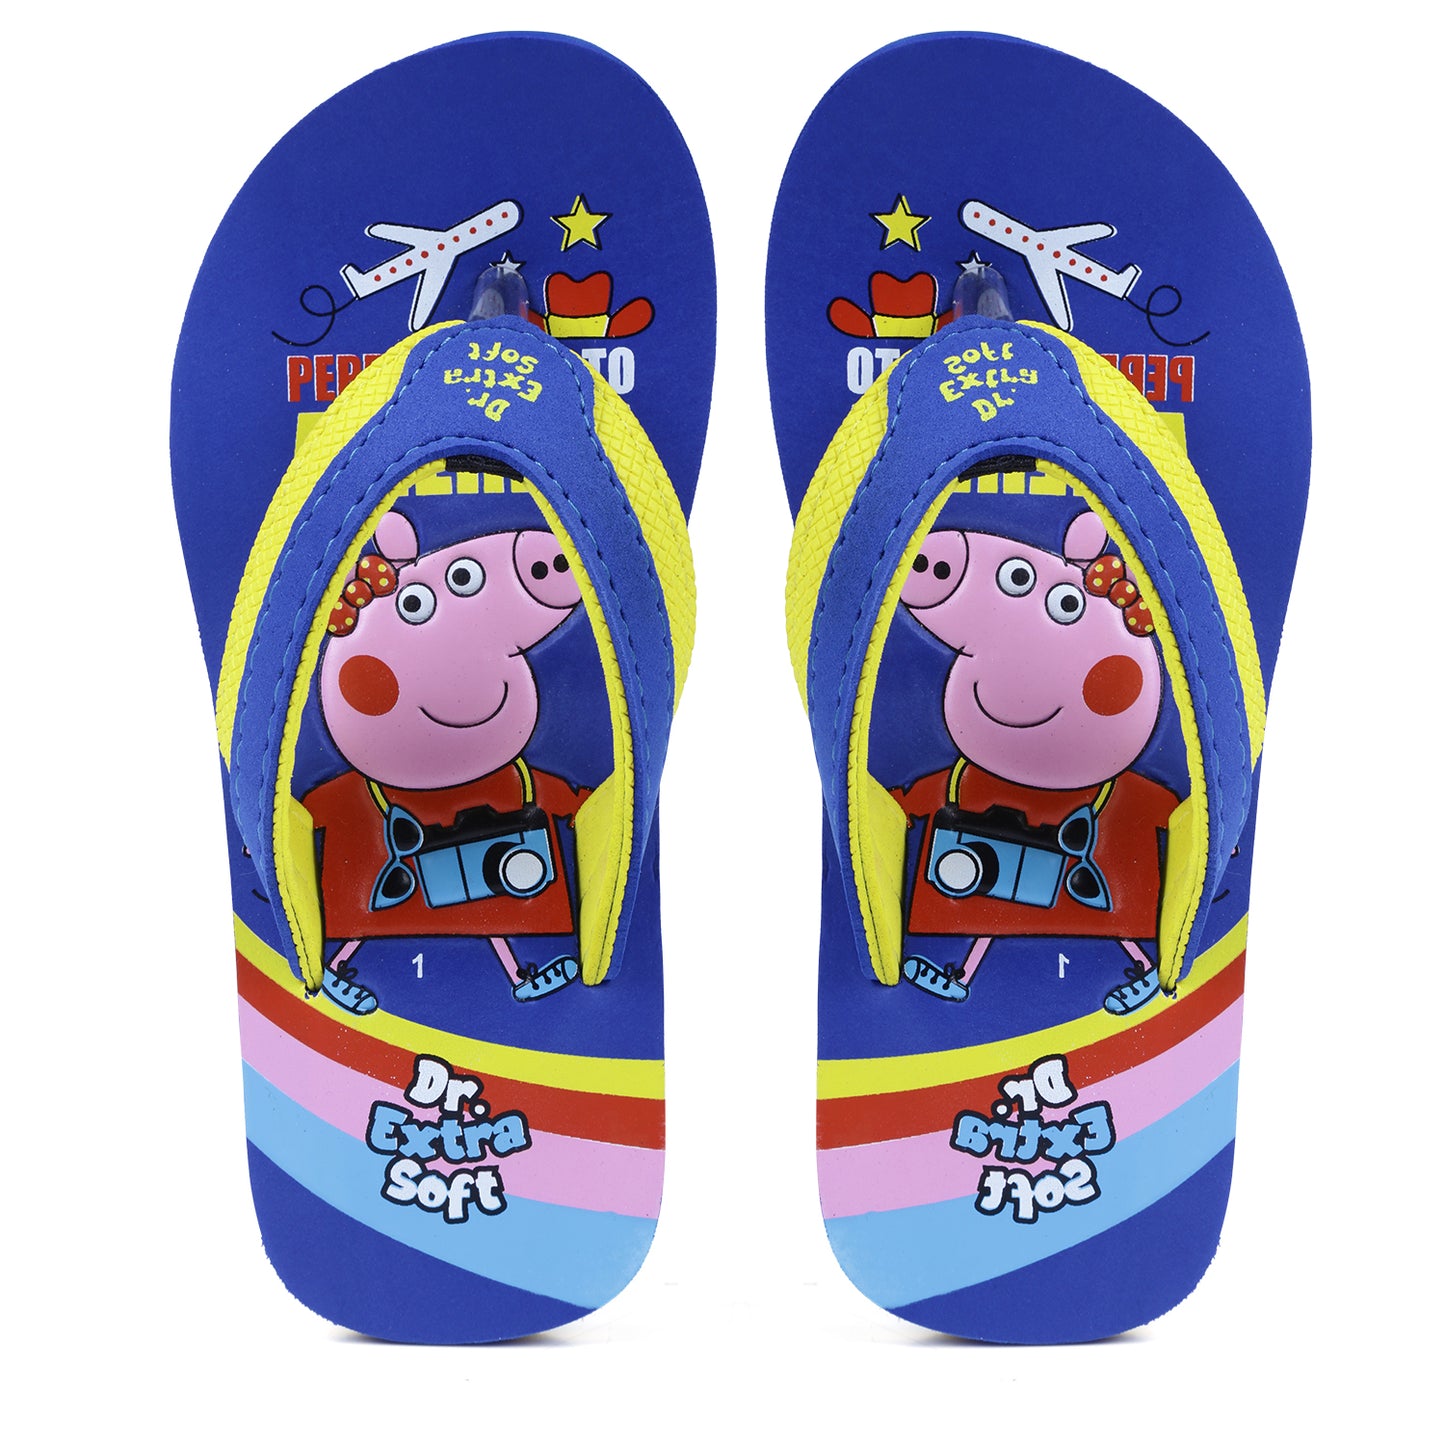 DOCTOR EXTRA SOFT Unisex-Child Kids Flip-Flop (Peppa Print) Soft Comfortable Indoor & Outdoor Slippers Stylish Non-Slip Slide Home Casual Cool Cartoon Cute House Chappals For Boys & Girls